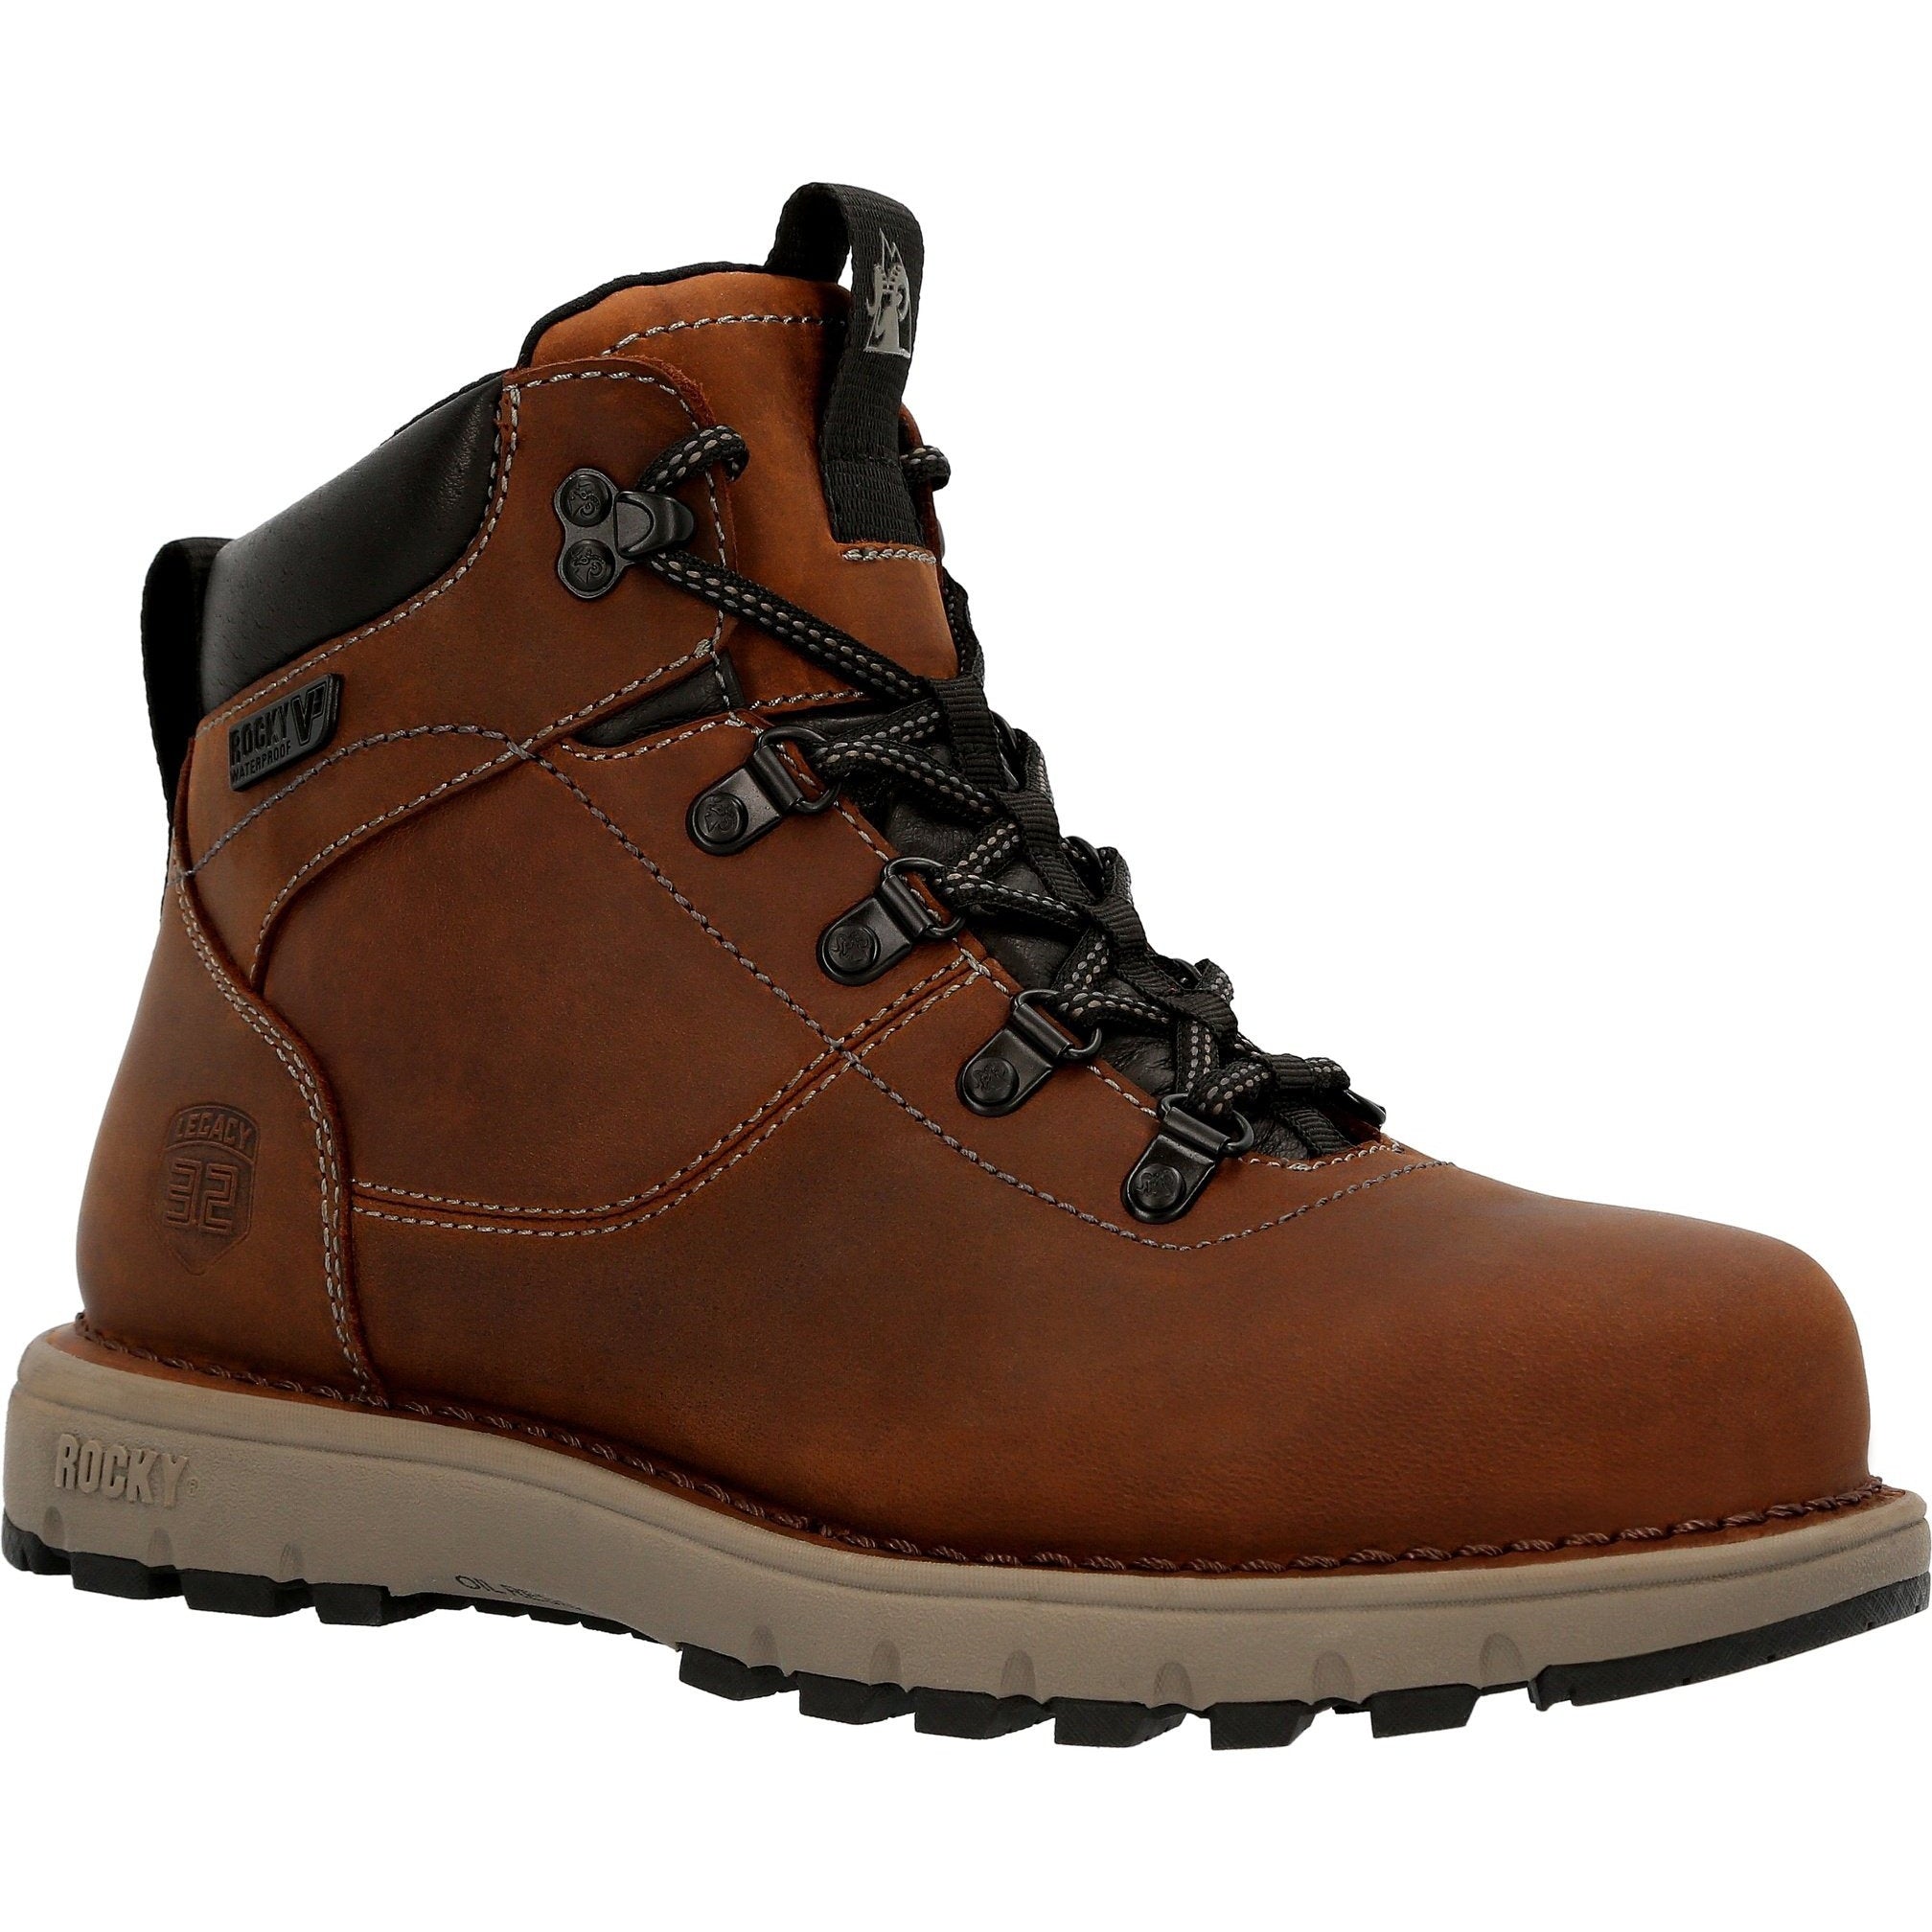 Women’s Work Boots & Shoes | Overlook Boots – Page 4